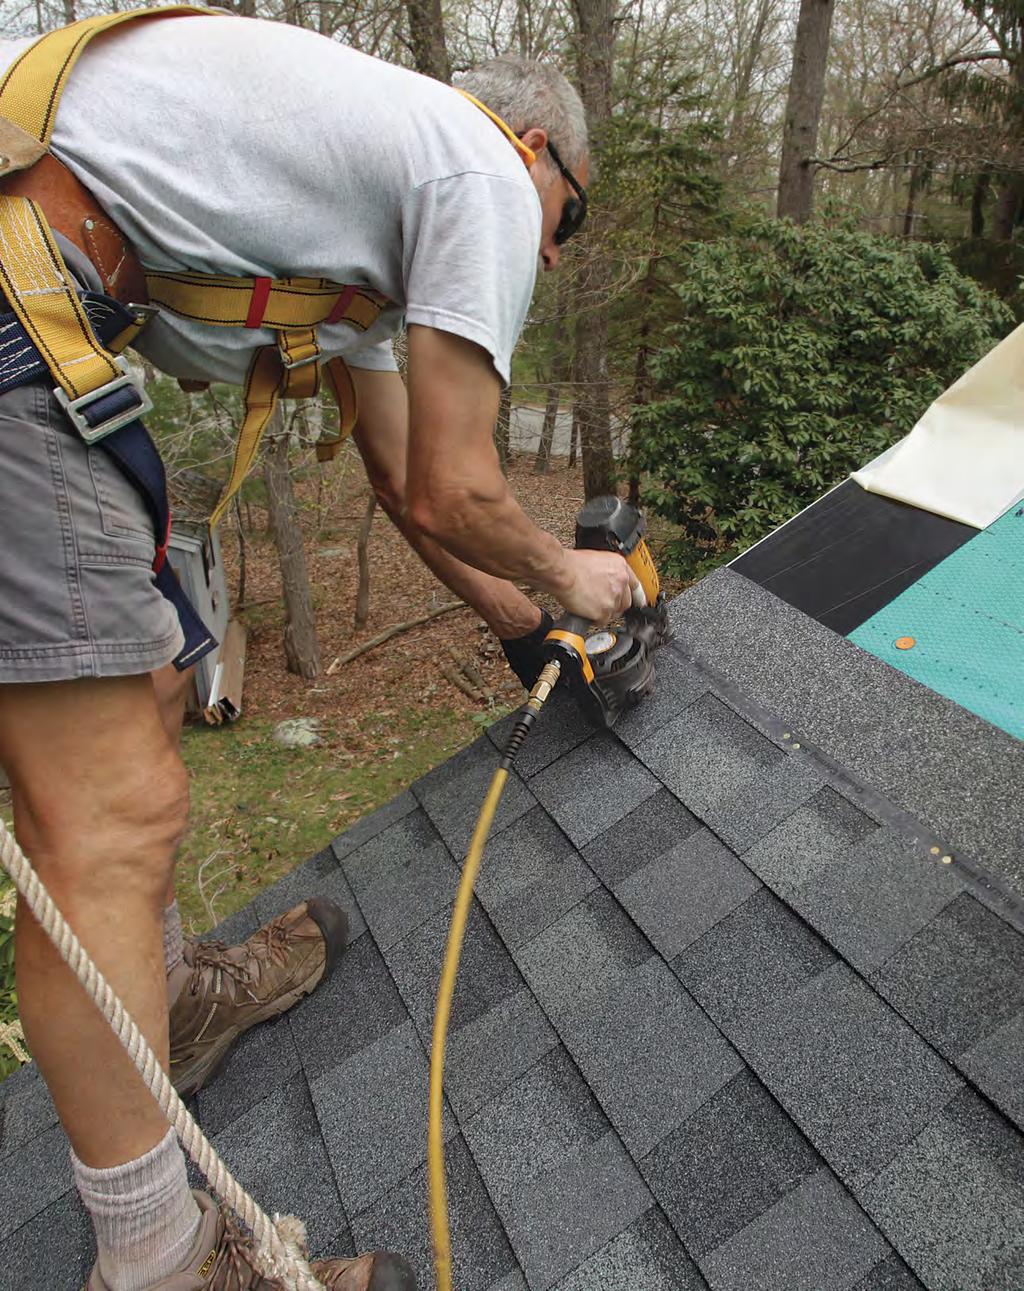 3nAil BetteR, nail more How and where you nail shingles is extremely important to wind resistance.